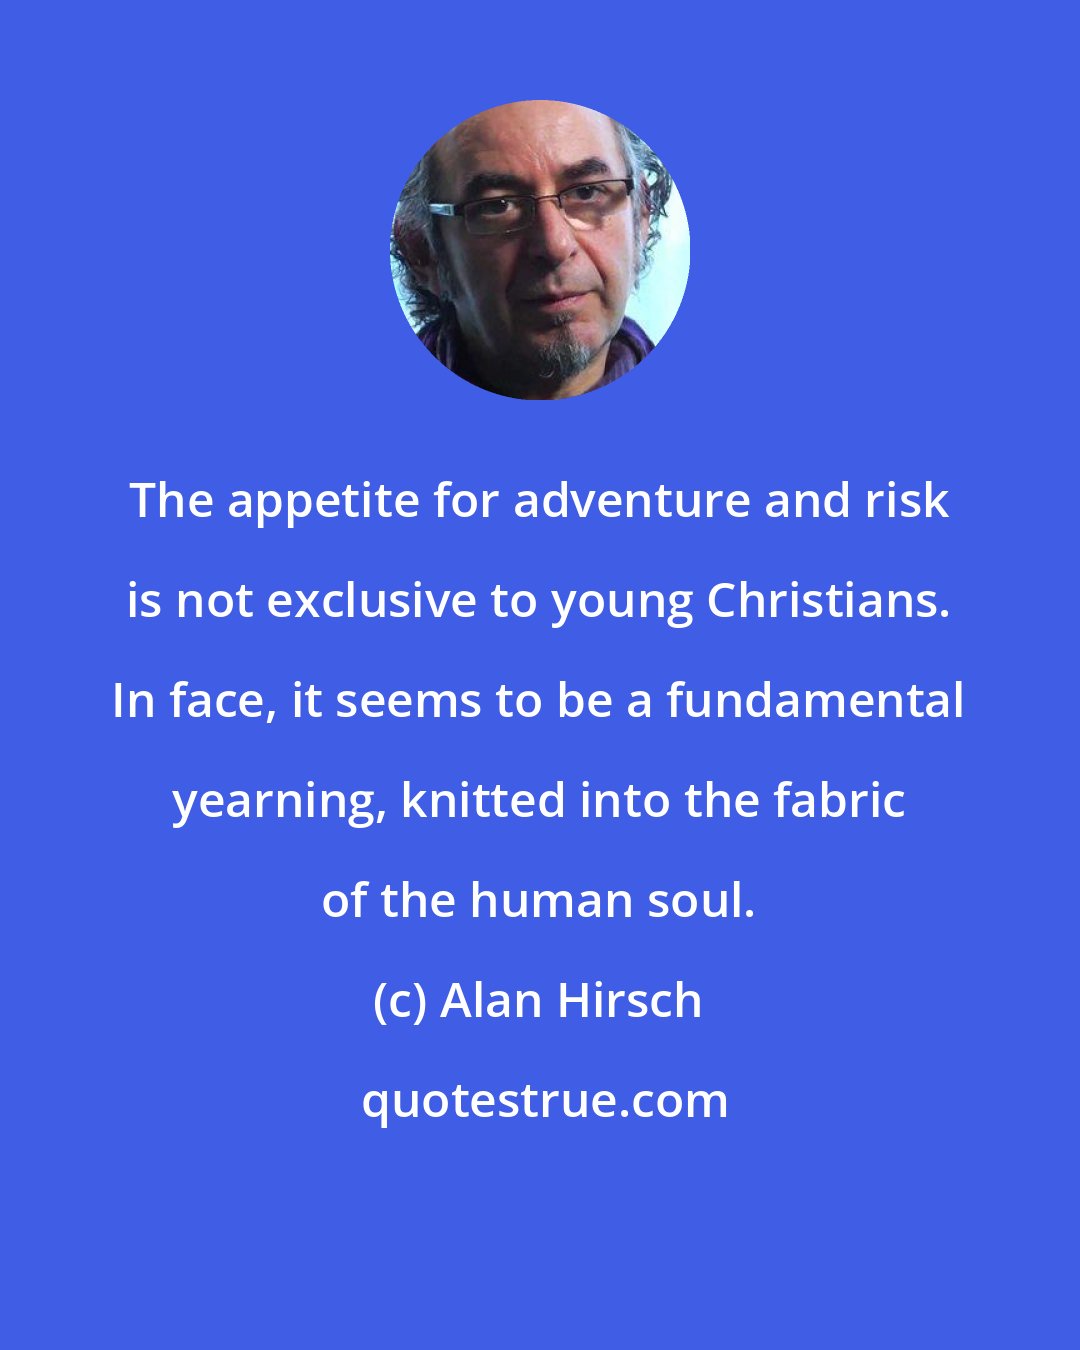 Alan Hirsch: The appetite for adventure and risk is not exclusive to young Christians. In face, it seems to be a fundamental yearning, knitted into the fabric of the human soul.